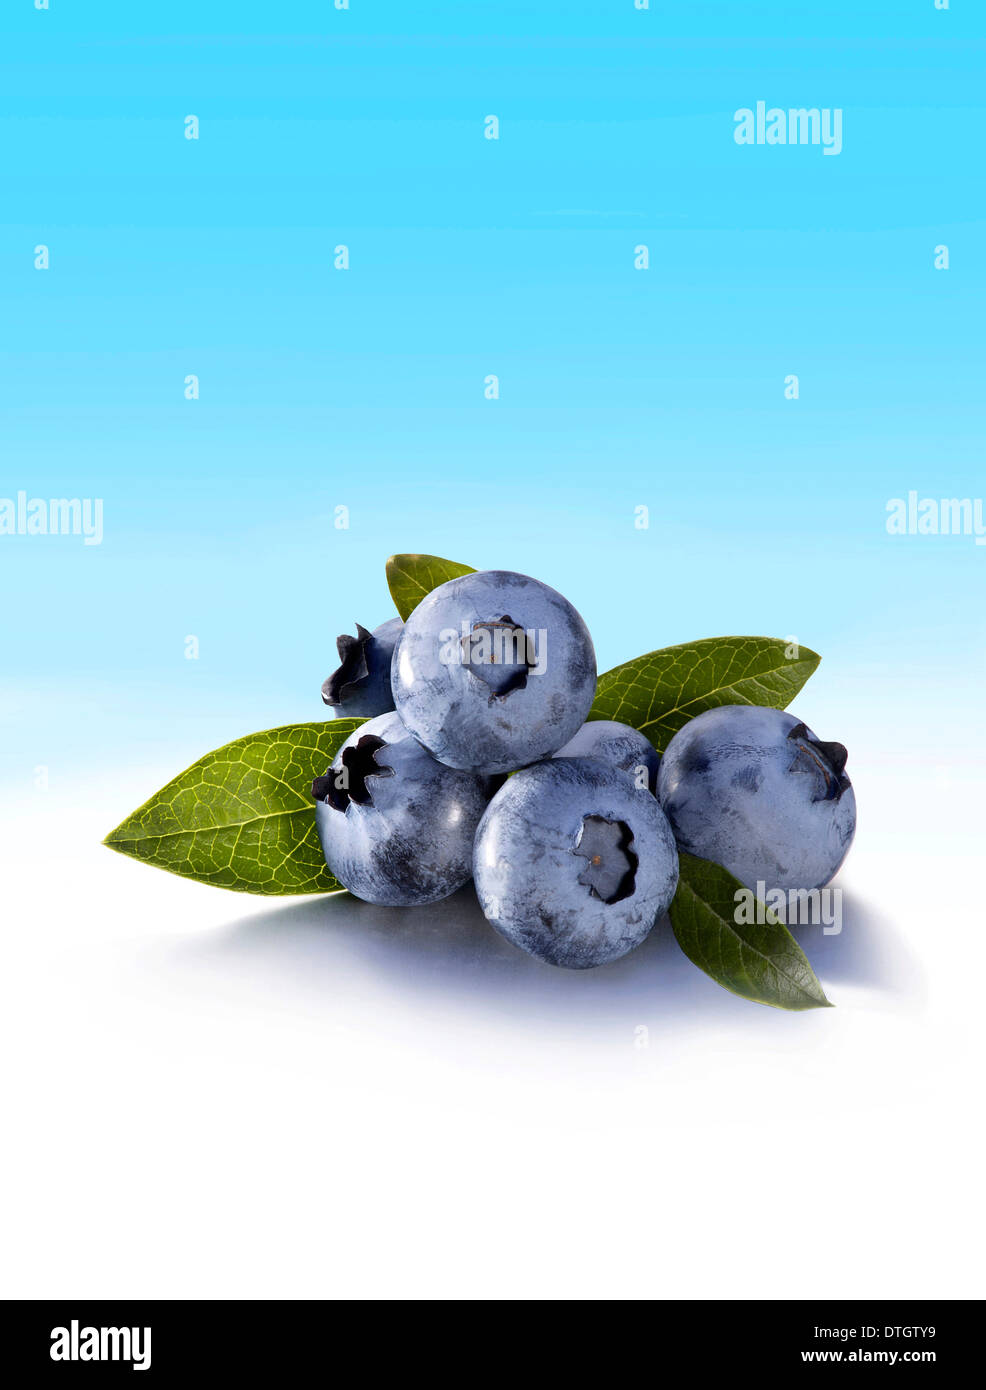 Bilberries or Blueberries (Vaccinium myrtillus) with leaves Stock Photo